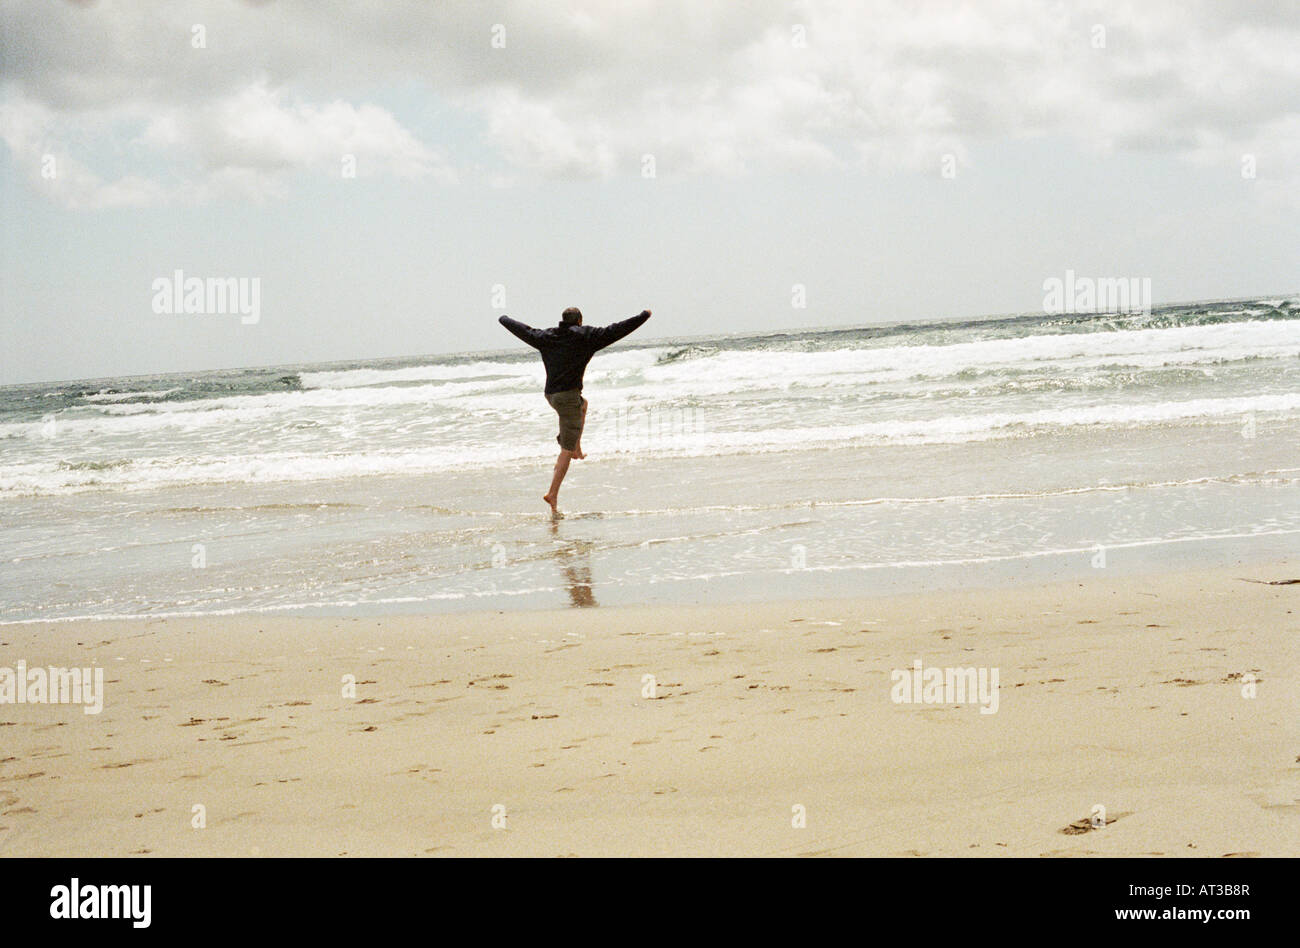 A man skipping through the waves, arms in the air Stock Photo